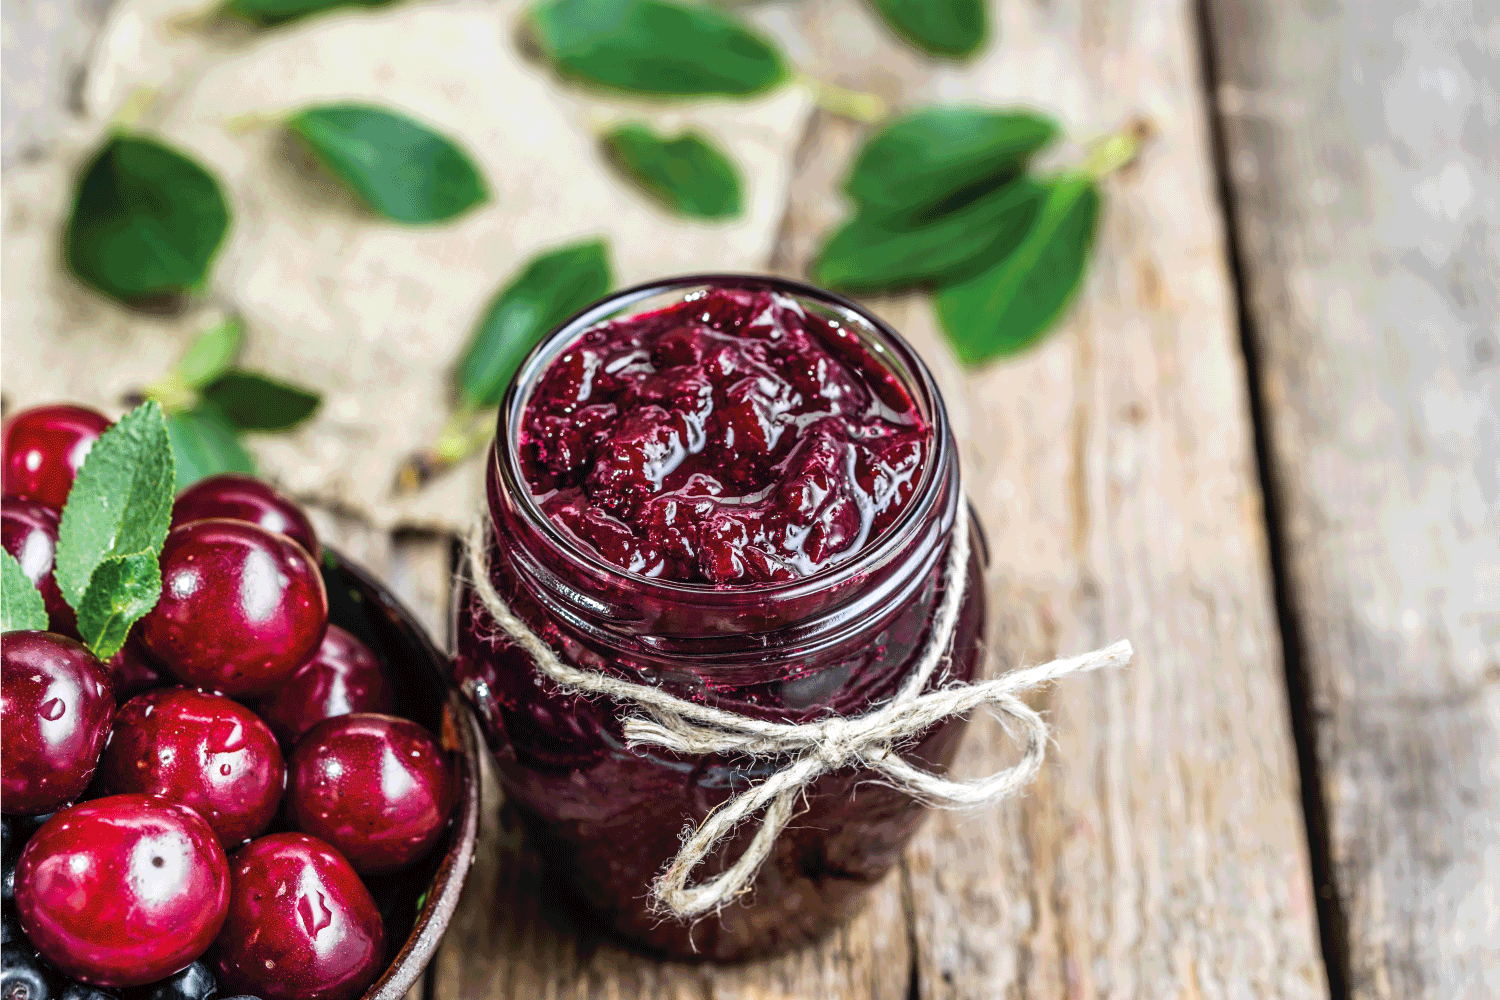 Cherry jam in jar and fresh cherries in a bowl, homemade preserves